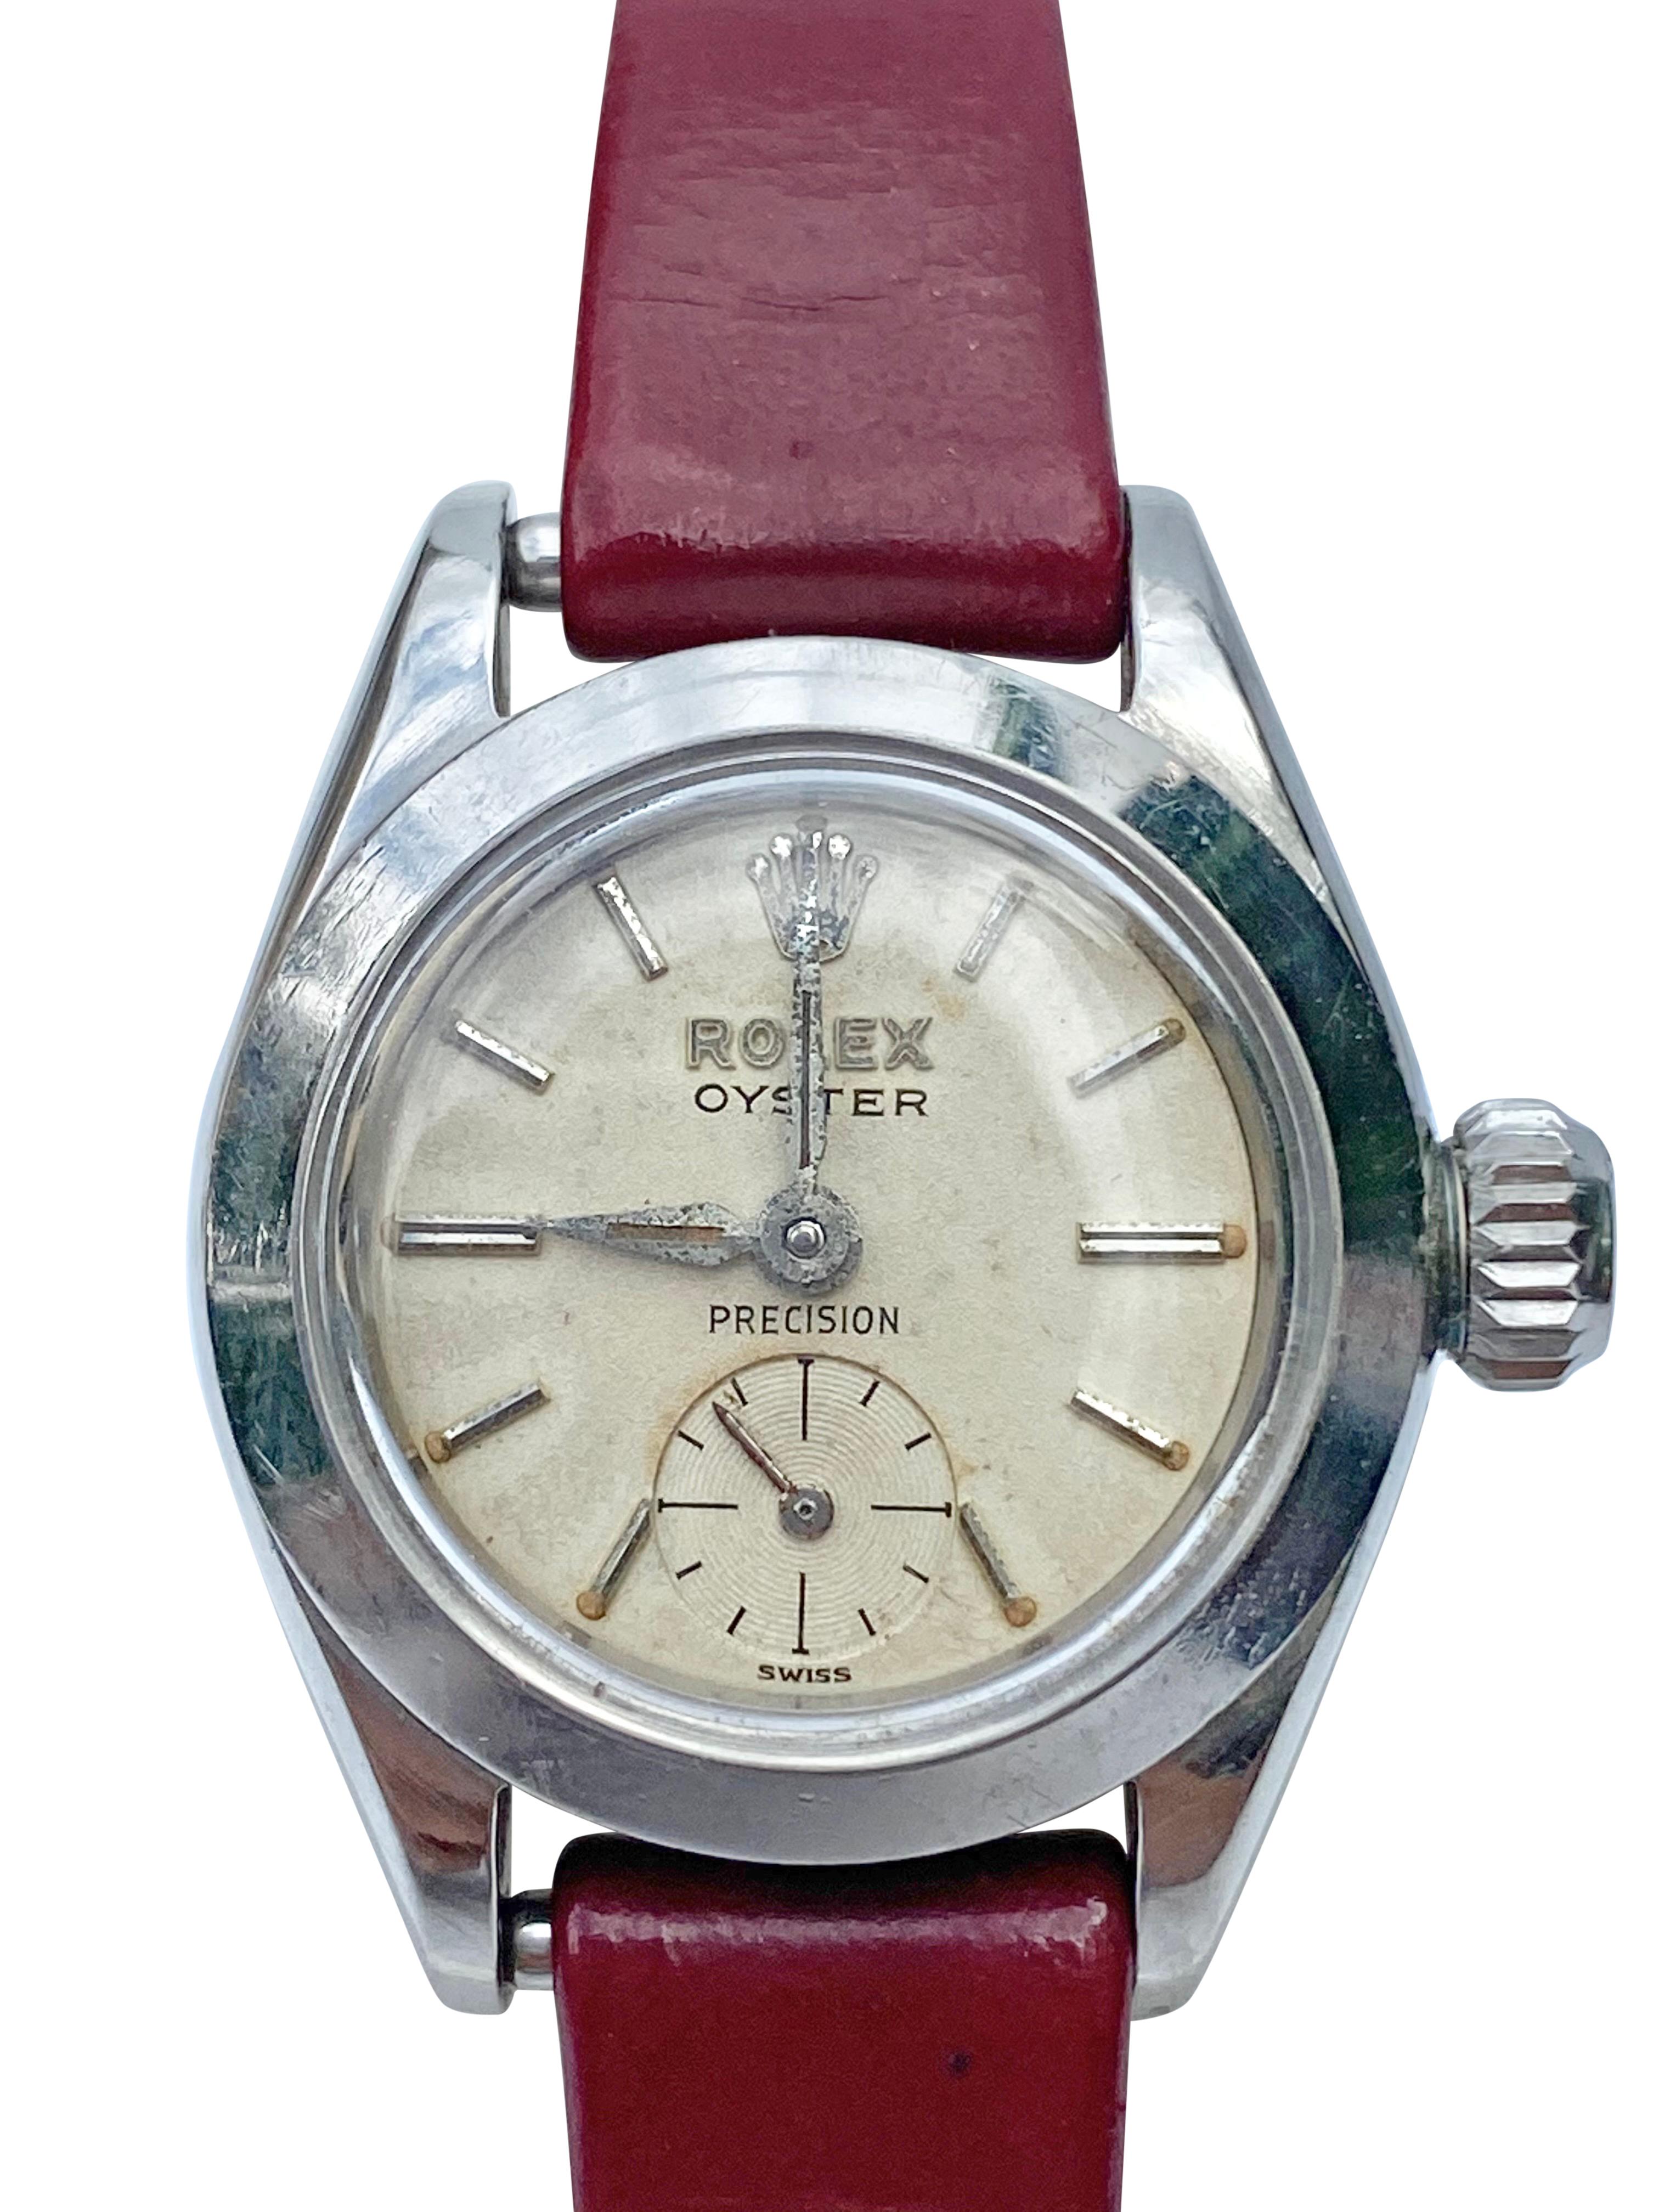 Vintage Rolex Oyster Precision stainless steel watch circa 1950. Manual wind movement caliber 10 1/2 is in full working condition. Case 30mm with original crystal and original crown. Untouched dial with a nice patina. Aftermarket genuine leather